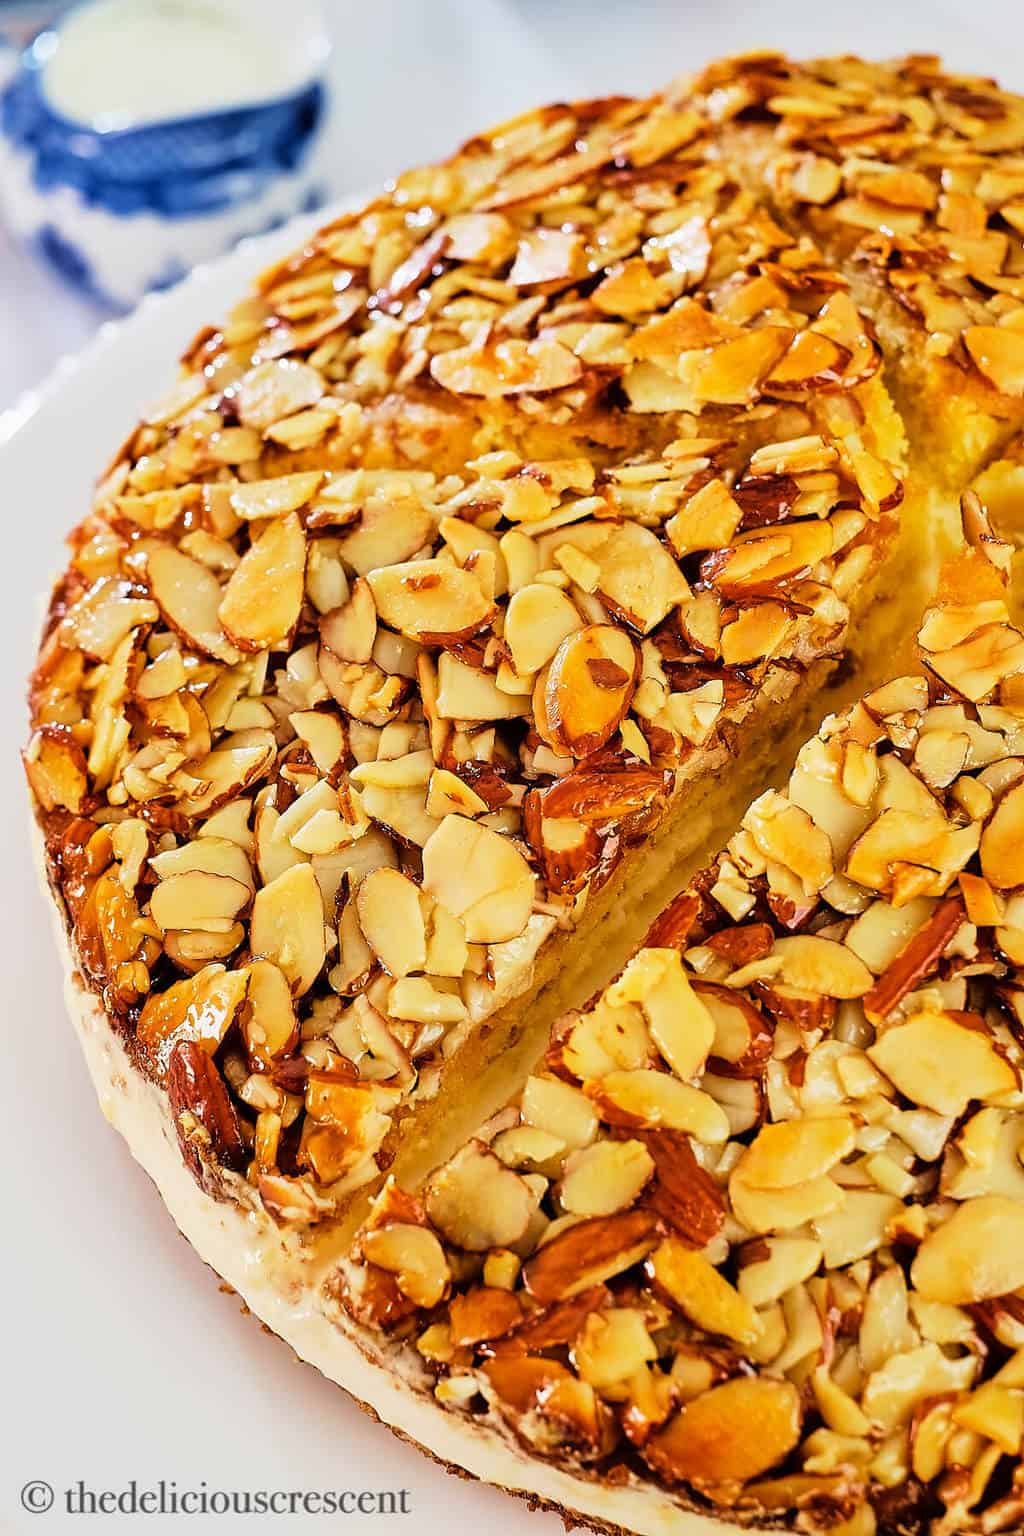 Top view of honey almond caramelized topping over Bienenstich.